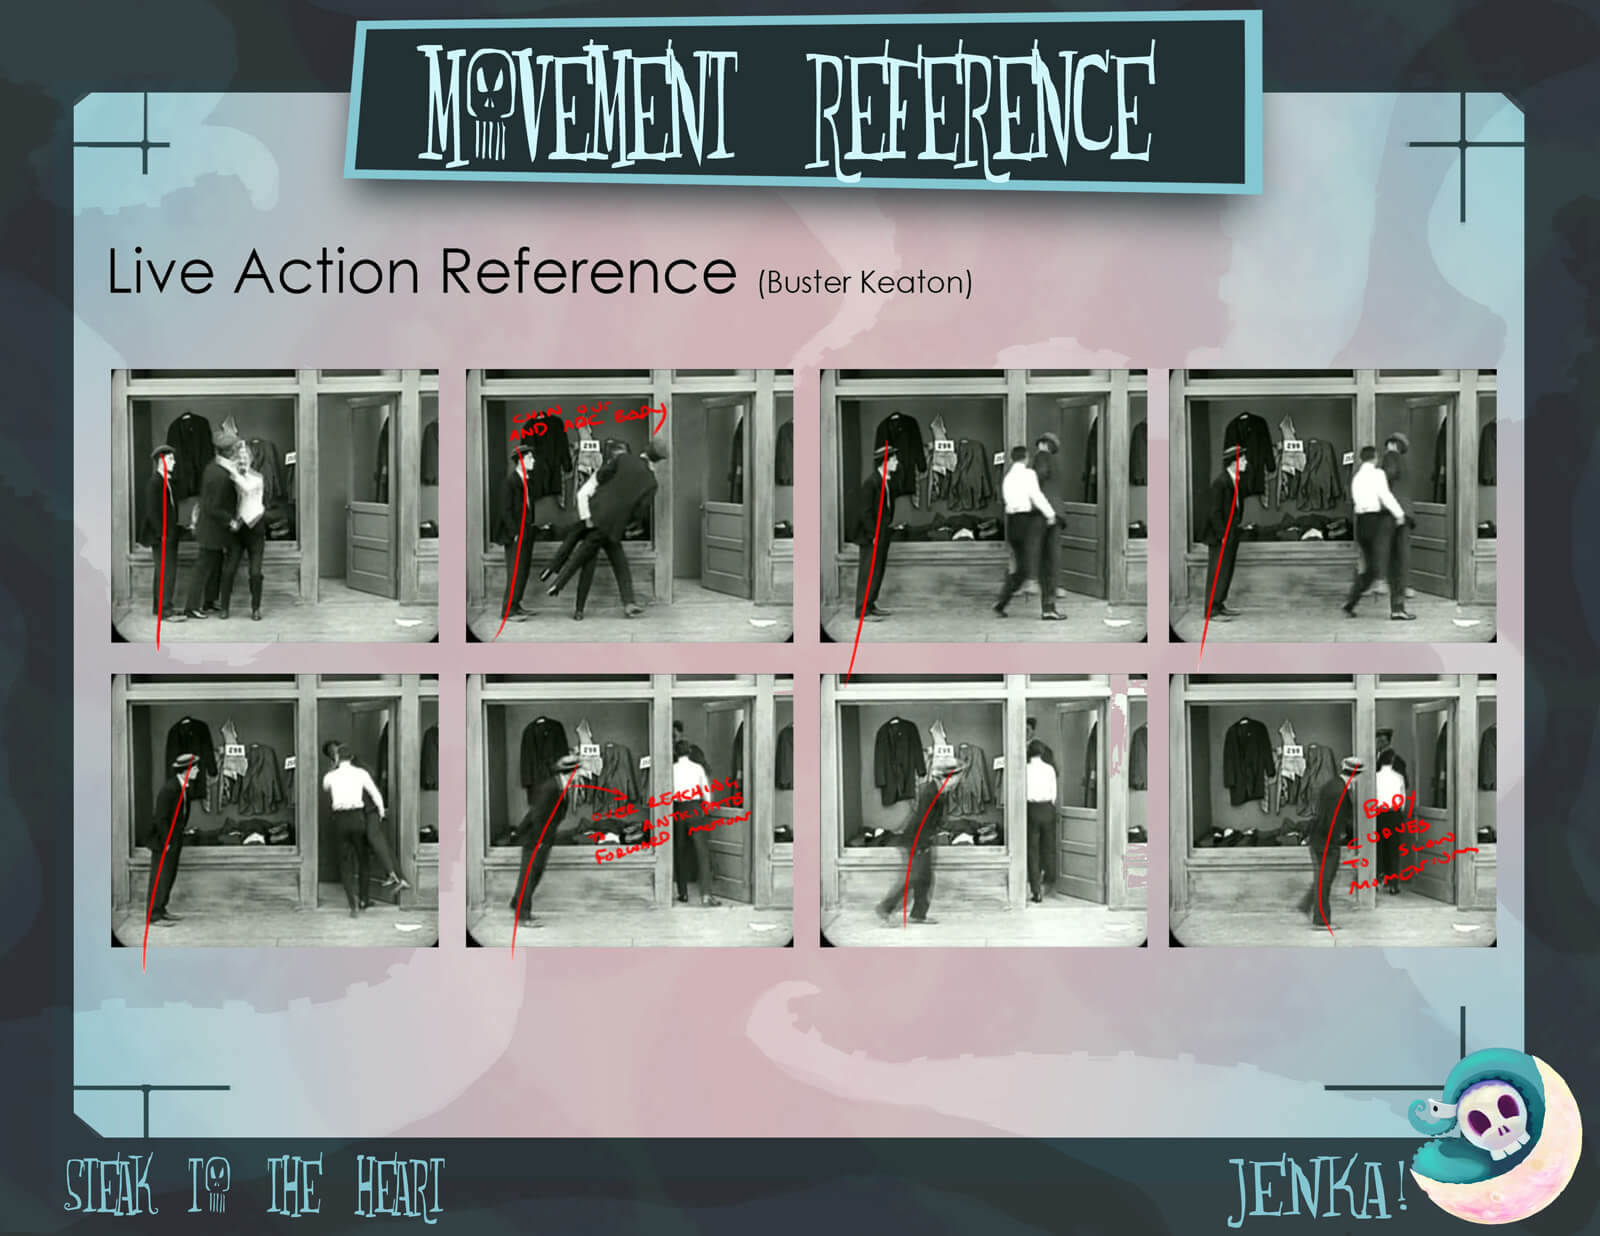 Movement Reference slide for the film Steak to the Heart, depicting 8 images from a Buster Keaton film as a reference